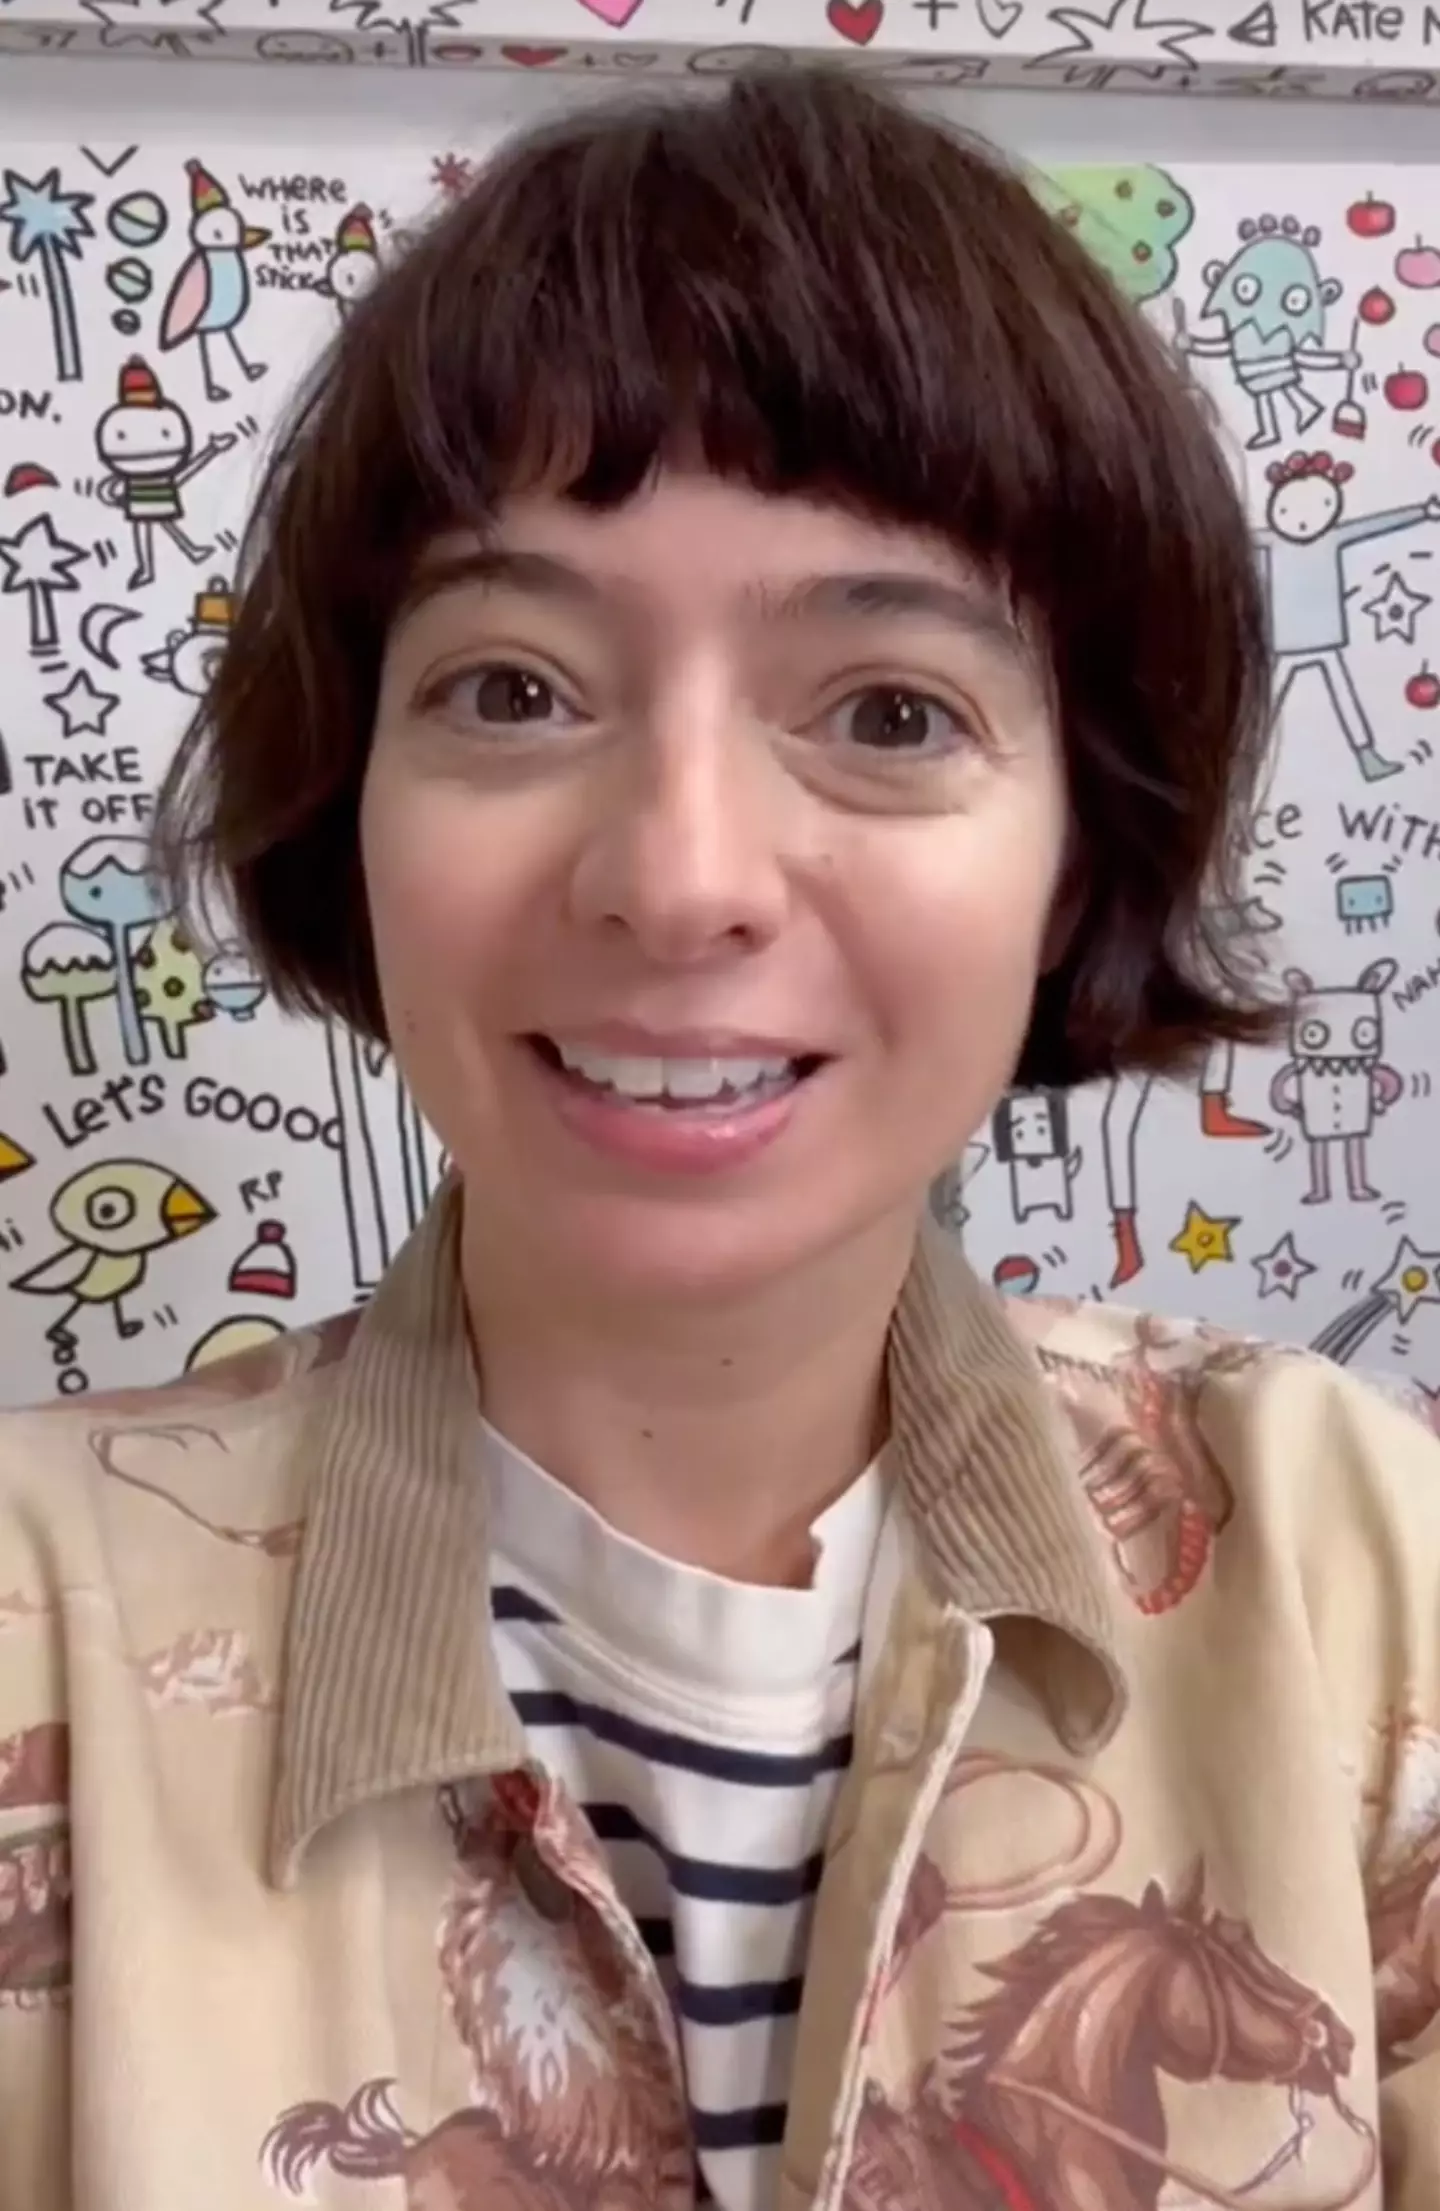 Kate Micucci shared some good news about her health with fans.